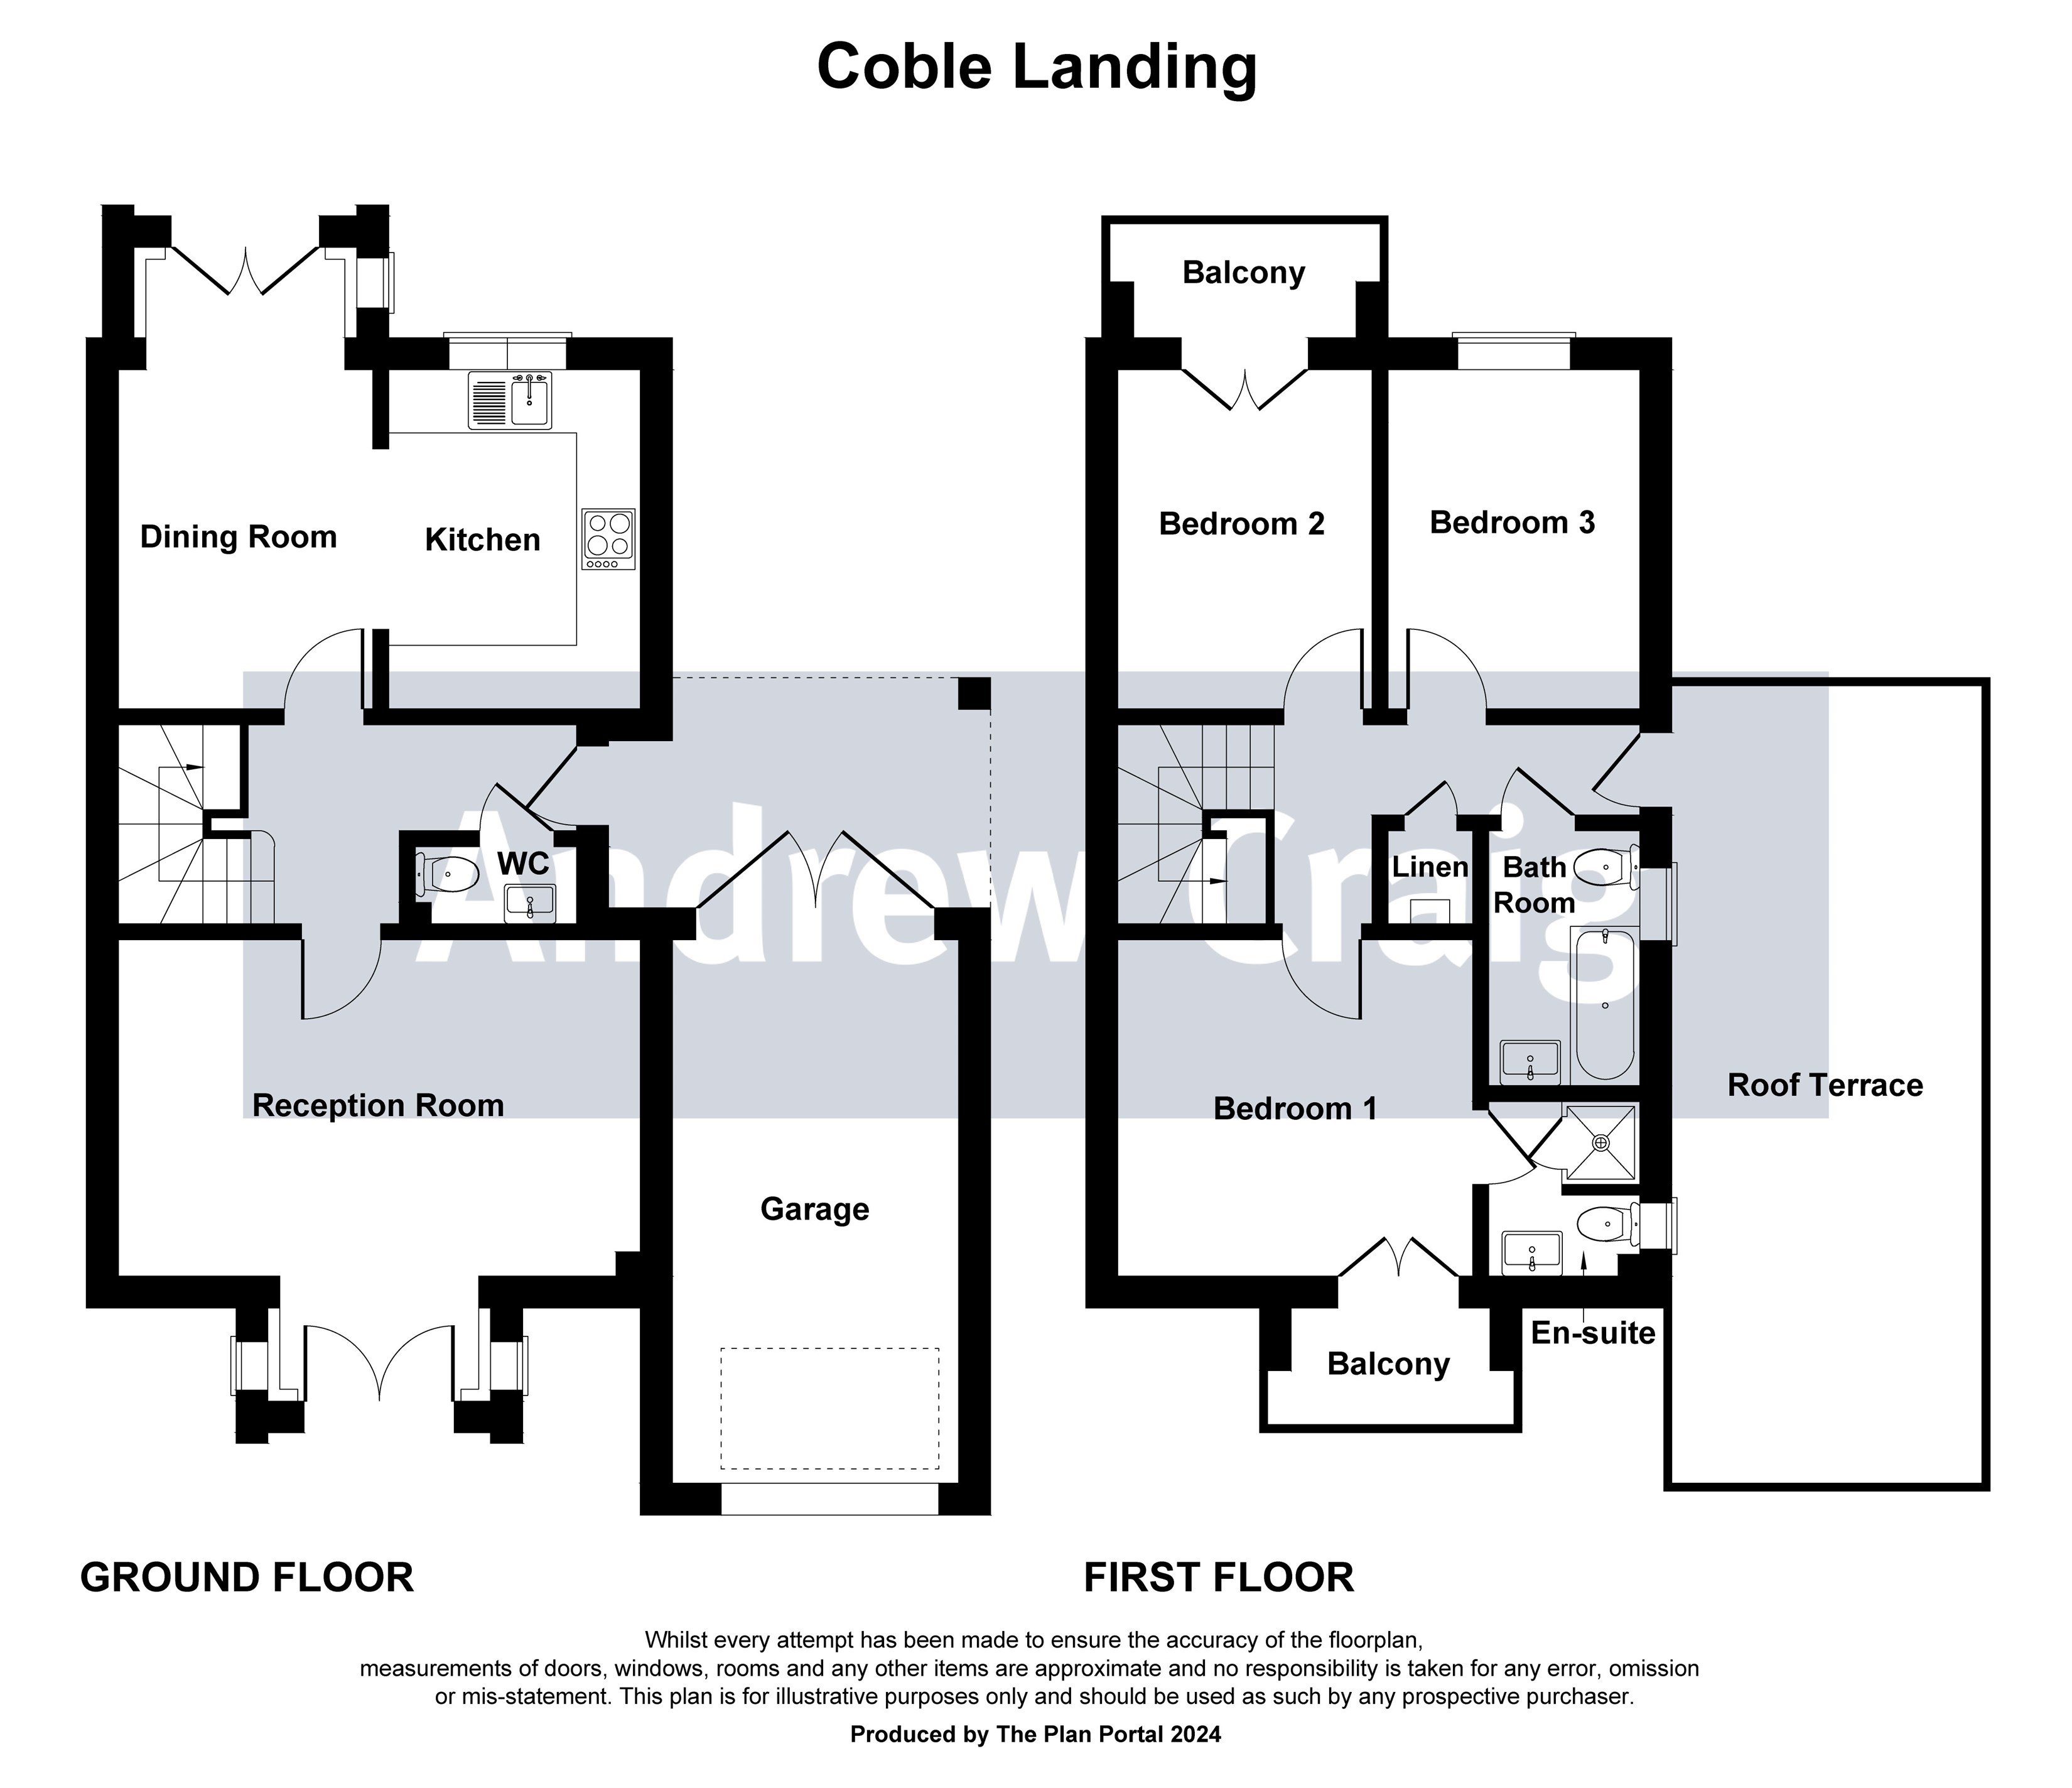 3 bed semi-detached house for sale in Coble Landing, South Shields - Property floorplan